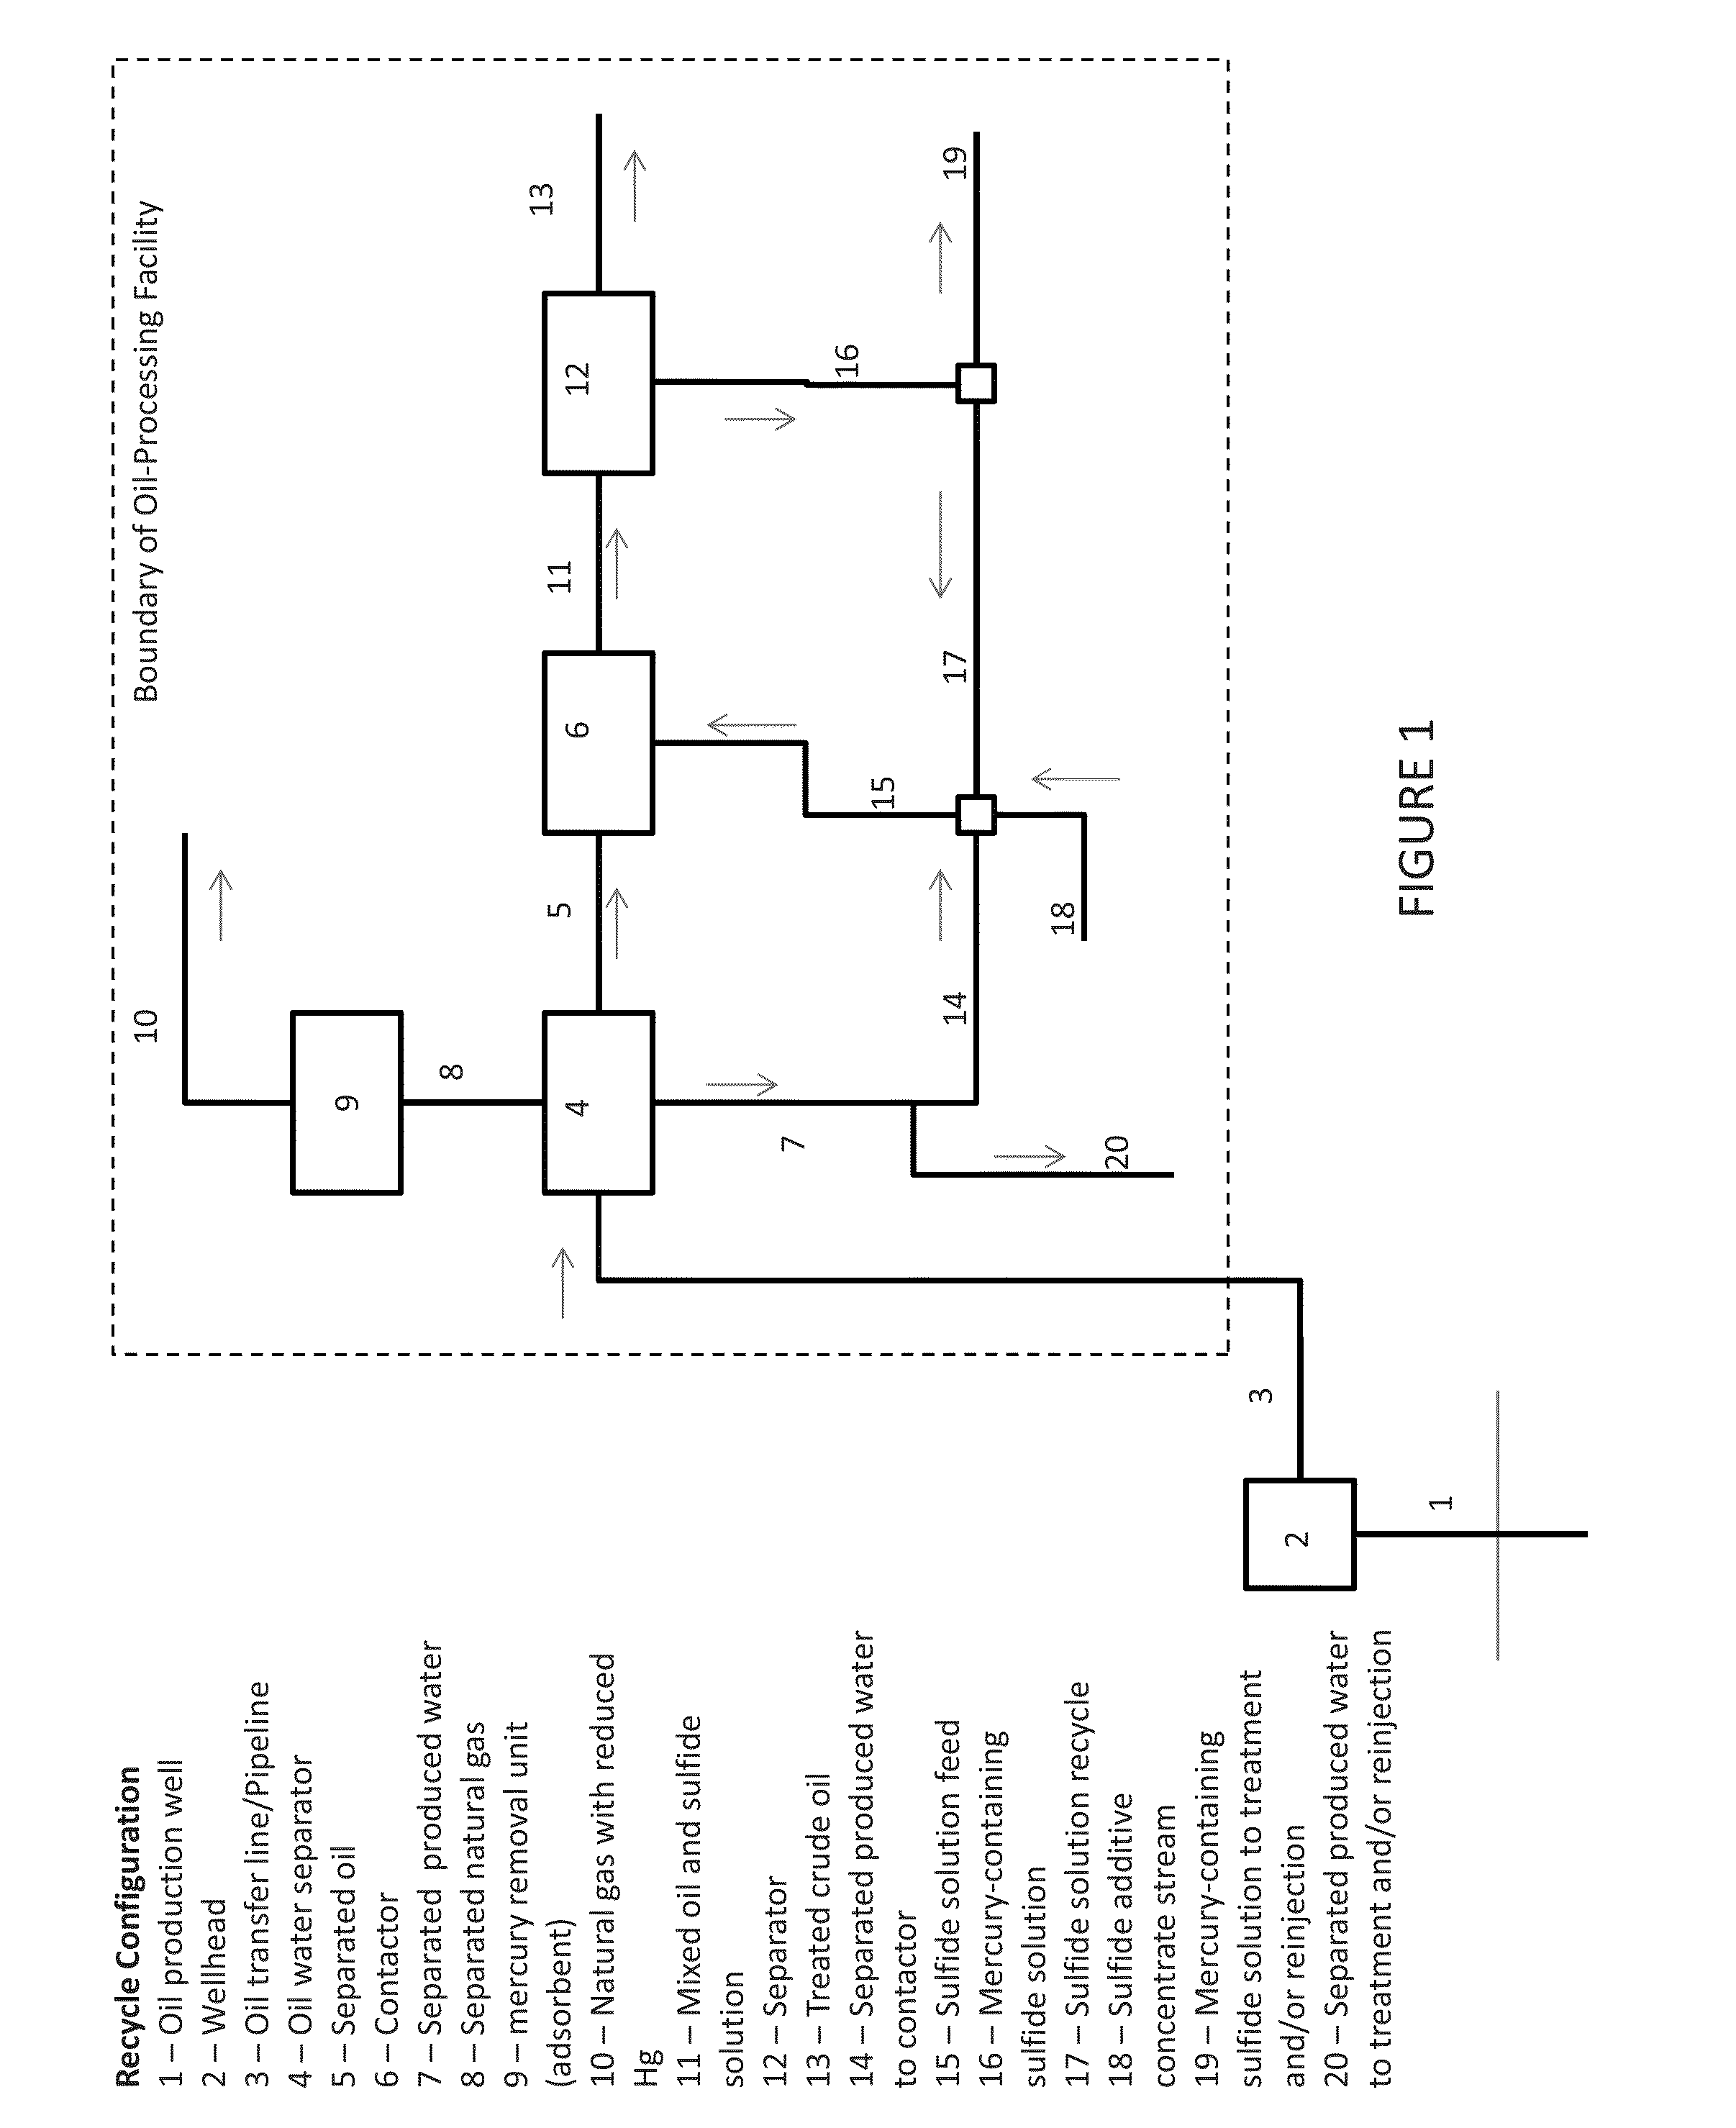 Process, method, and system for removing mercury from fluids